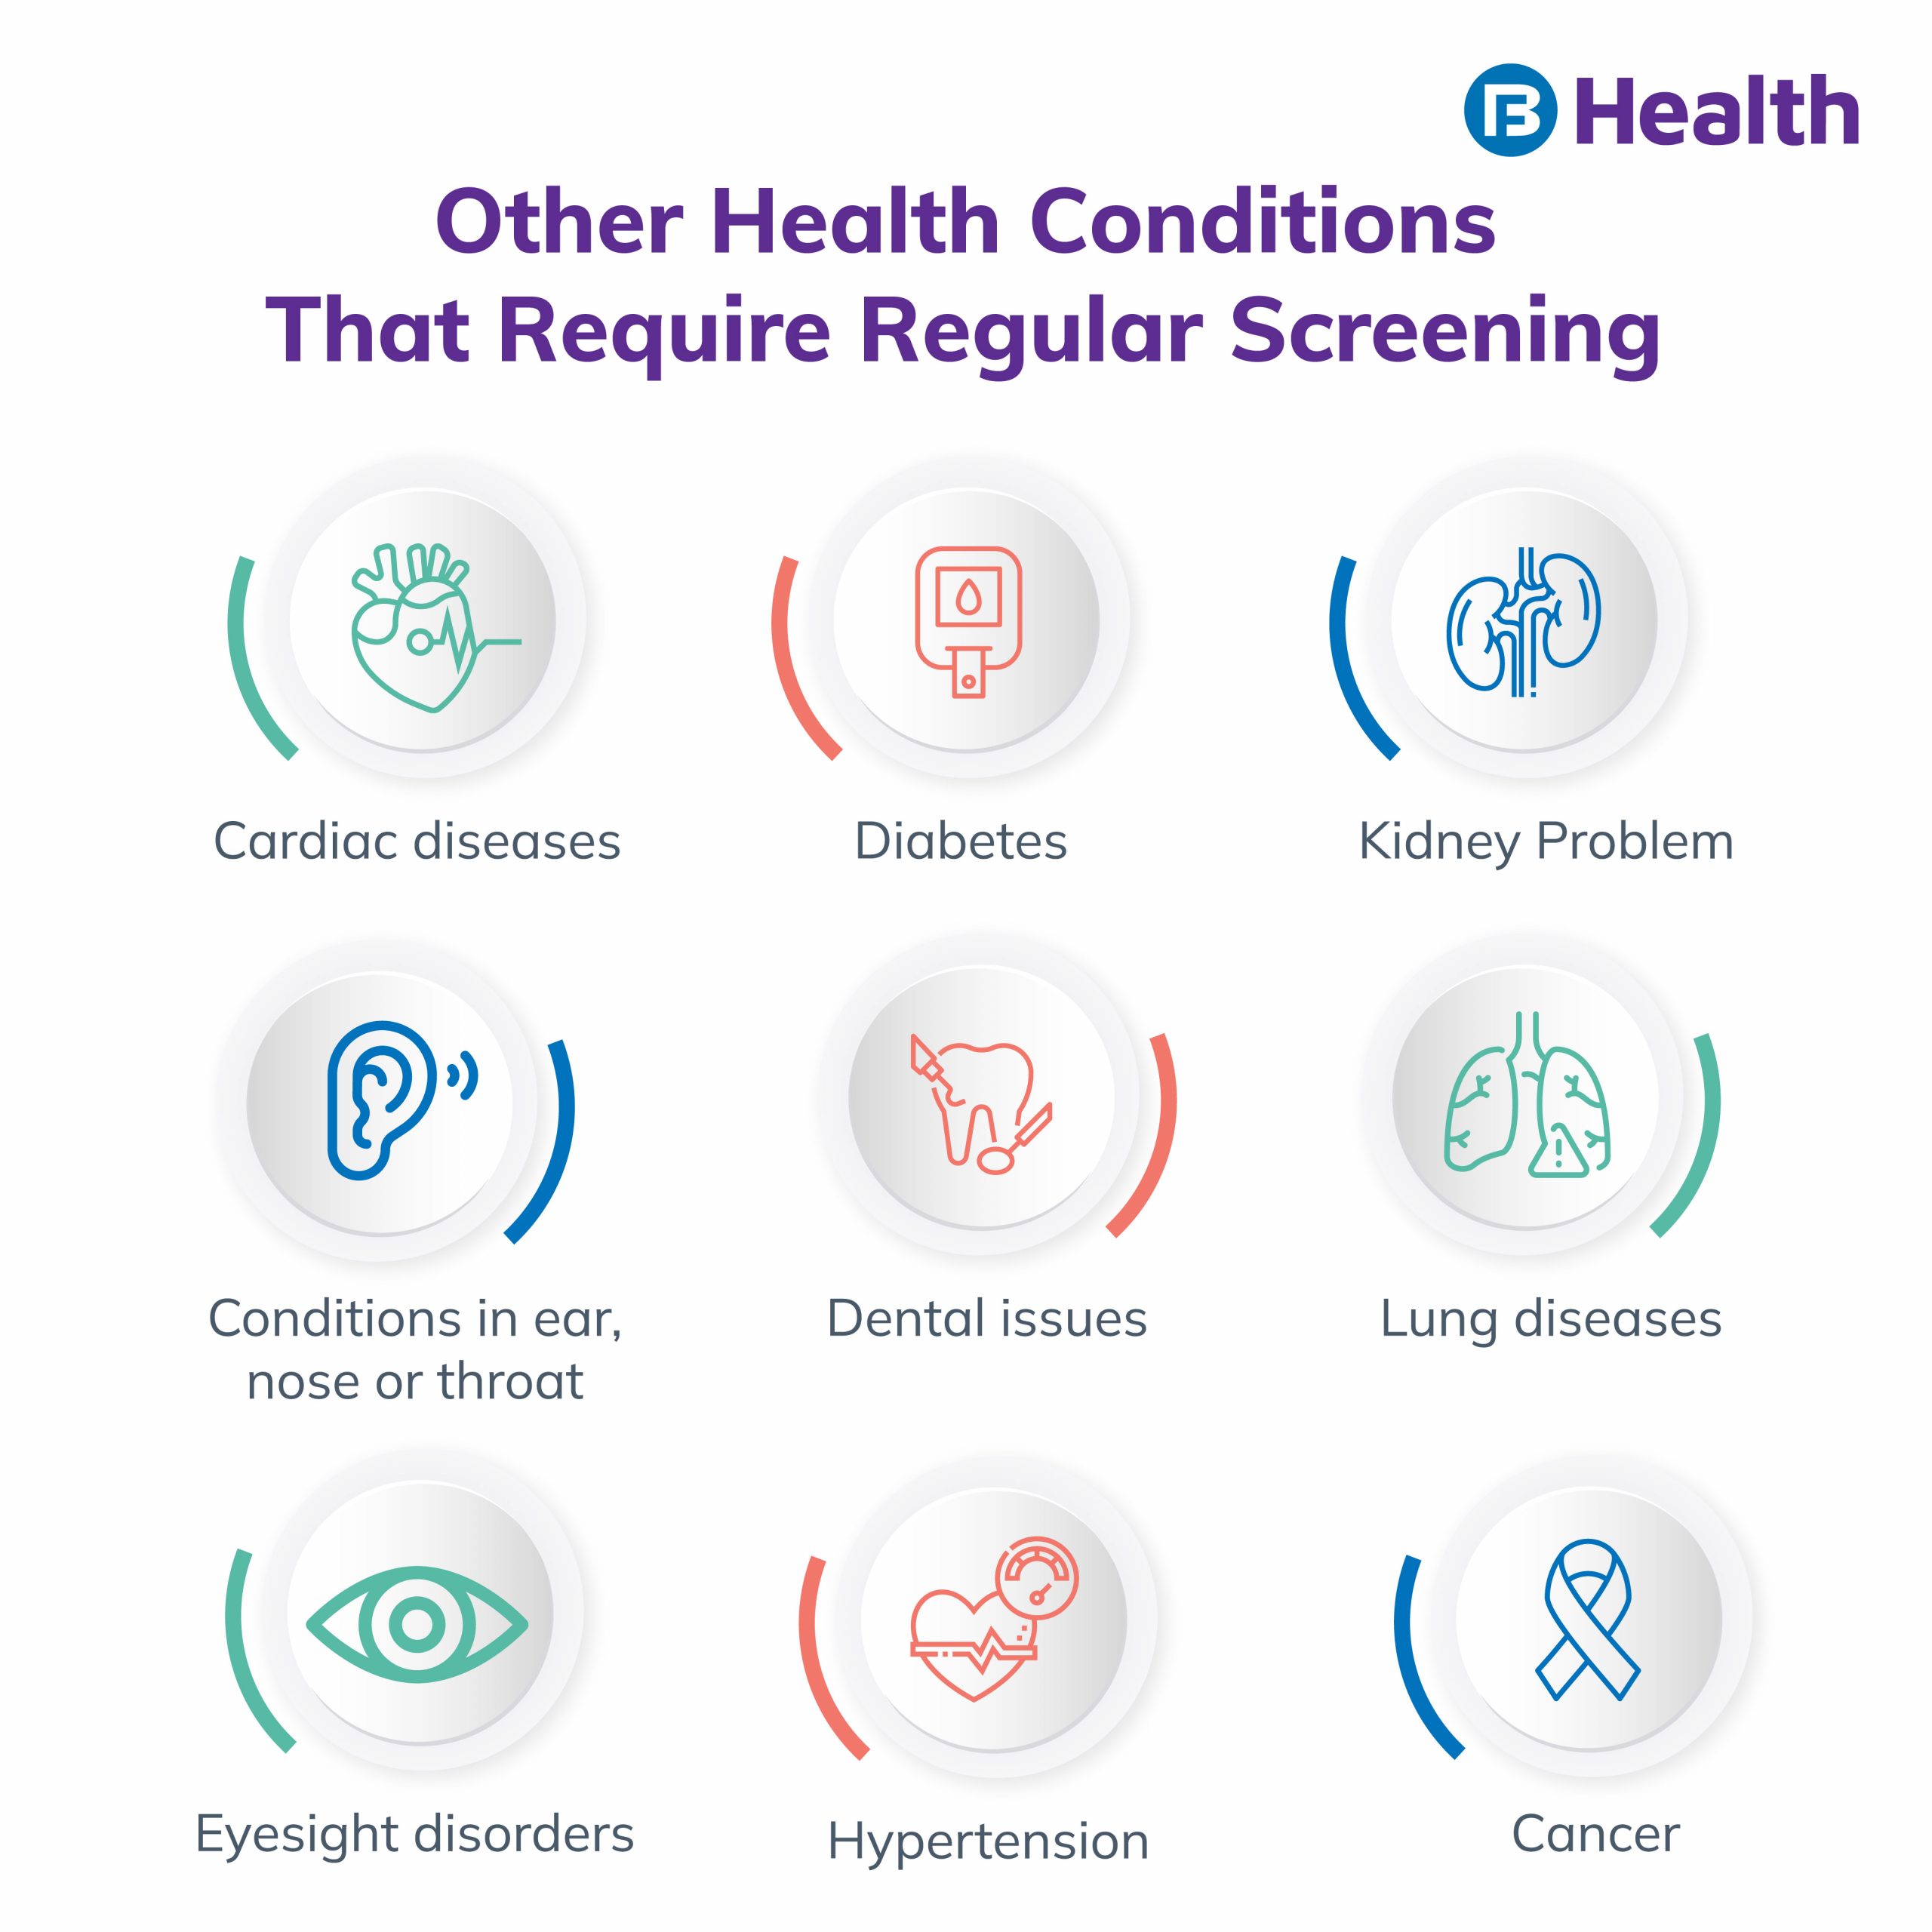 health conditions that require regular screening infographic